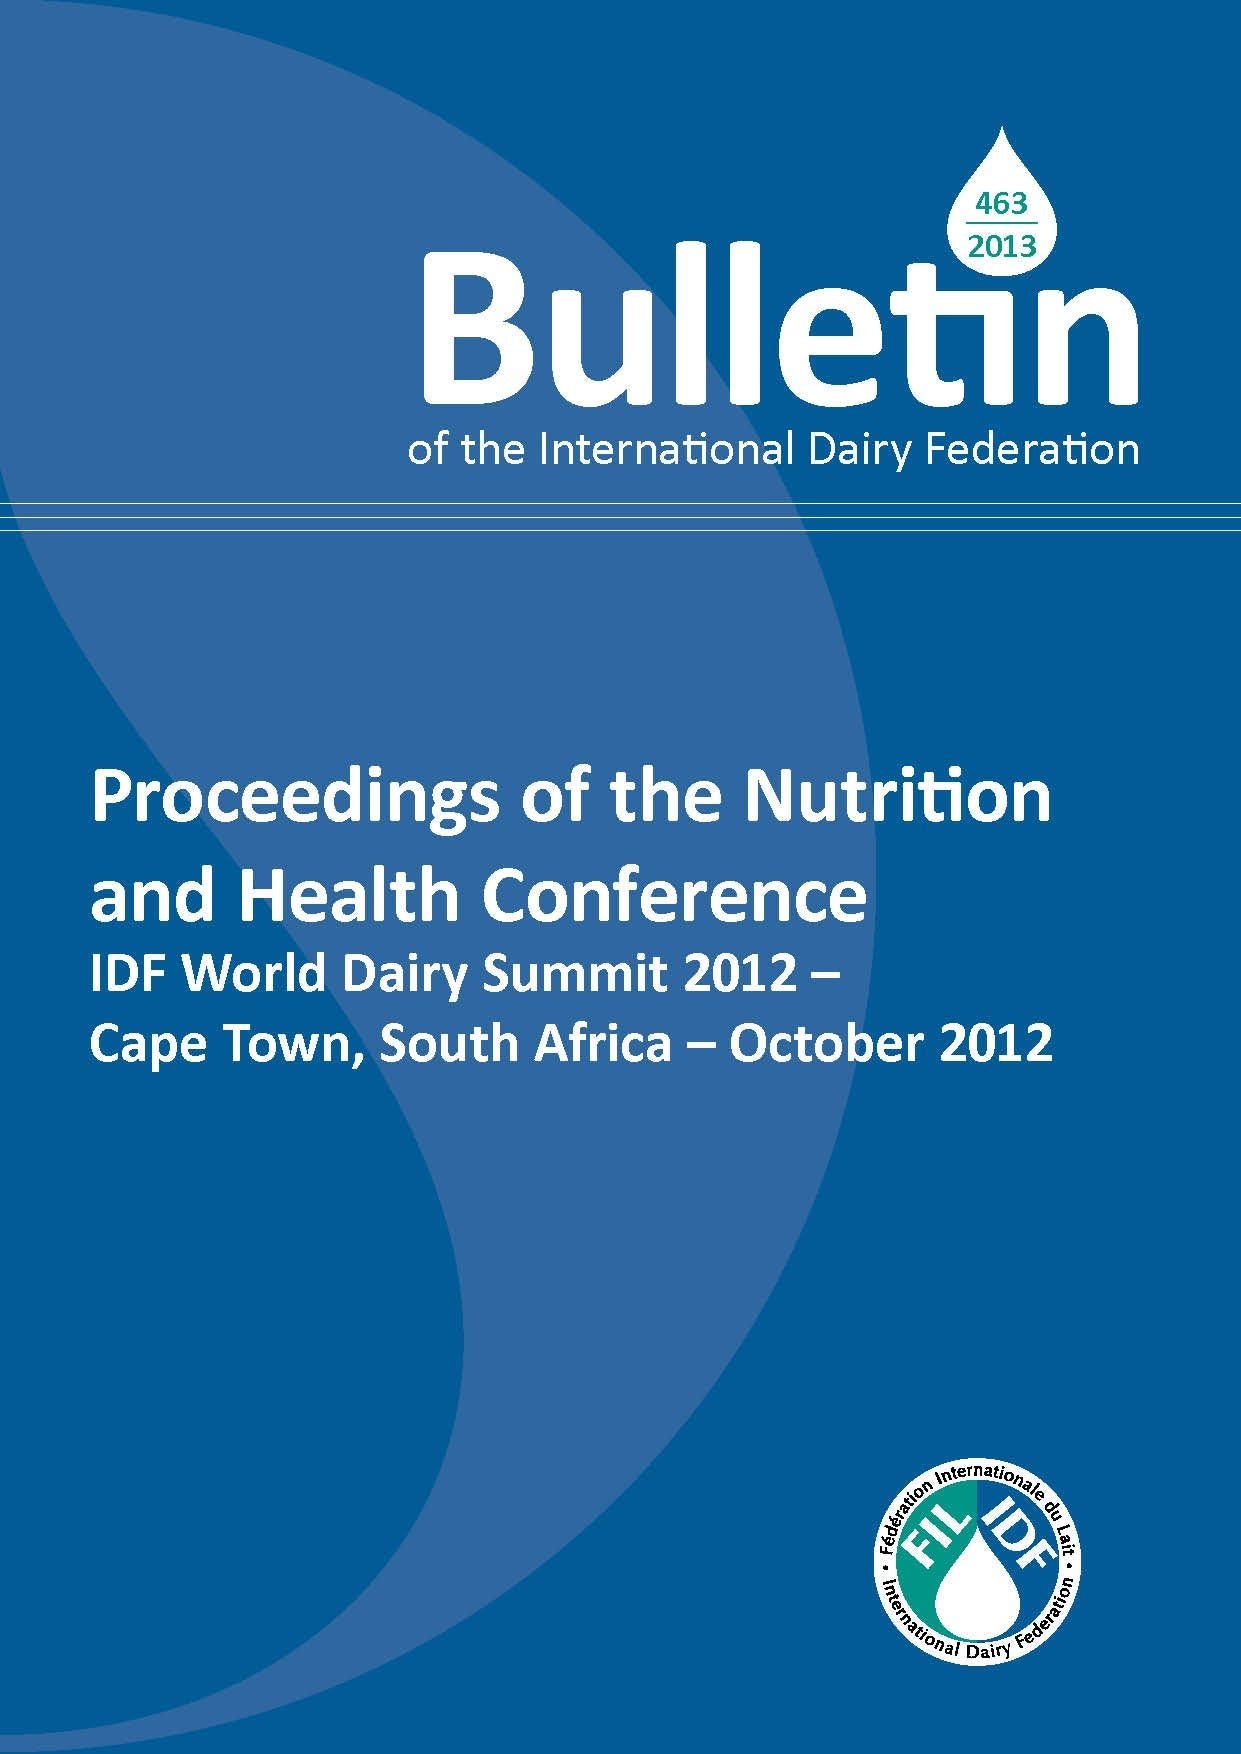 Bulletin of the IDF N° 463/2013: Proceedings of The Nutrition & Health Conference, IDF World Dairy Summit 2012 - Cape Town, South Africa-October 2012 - FIL-IDF